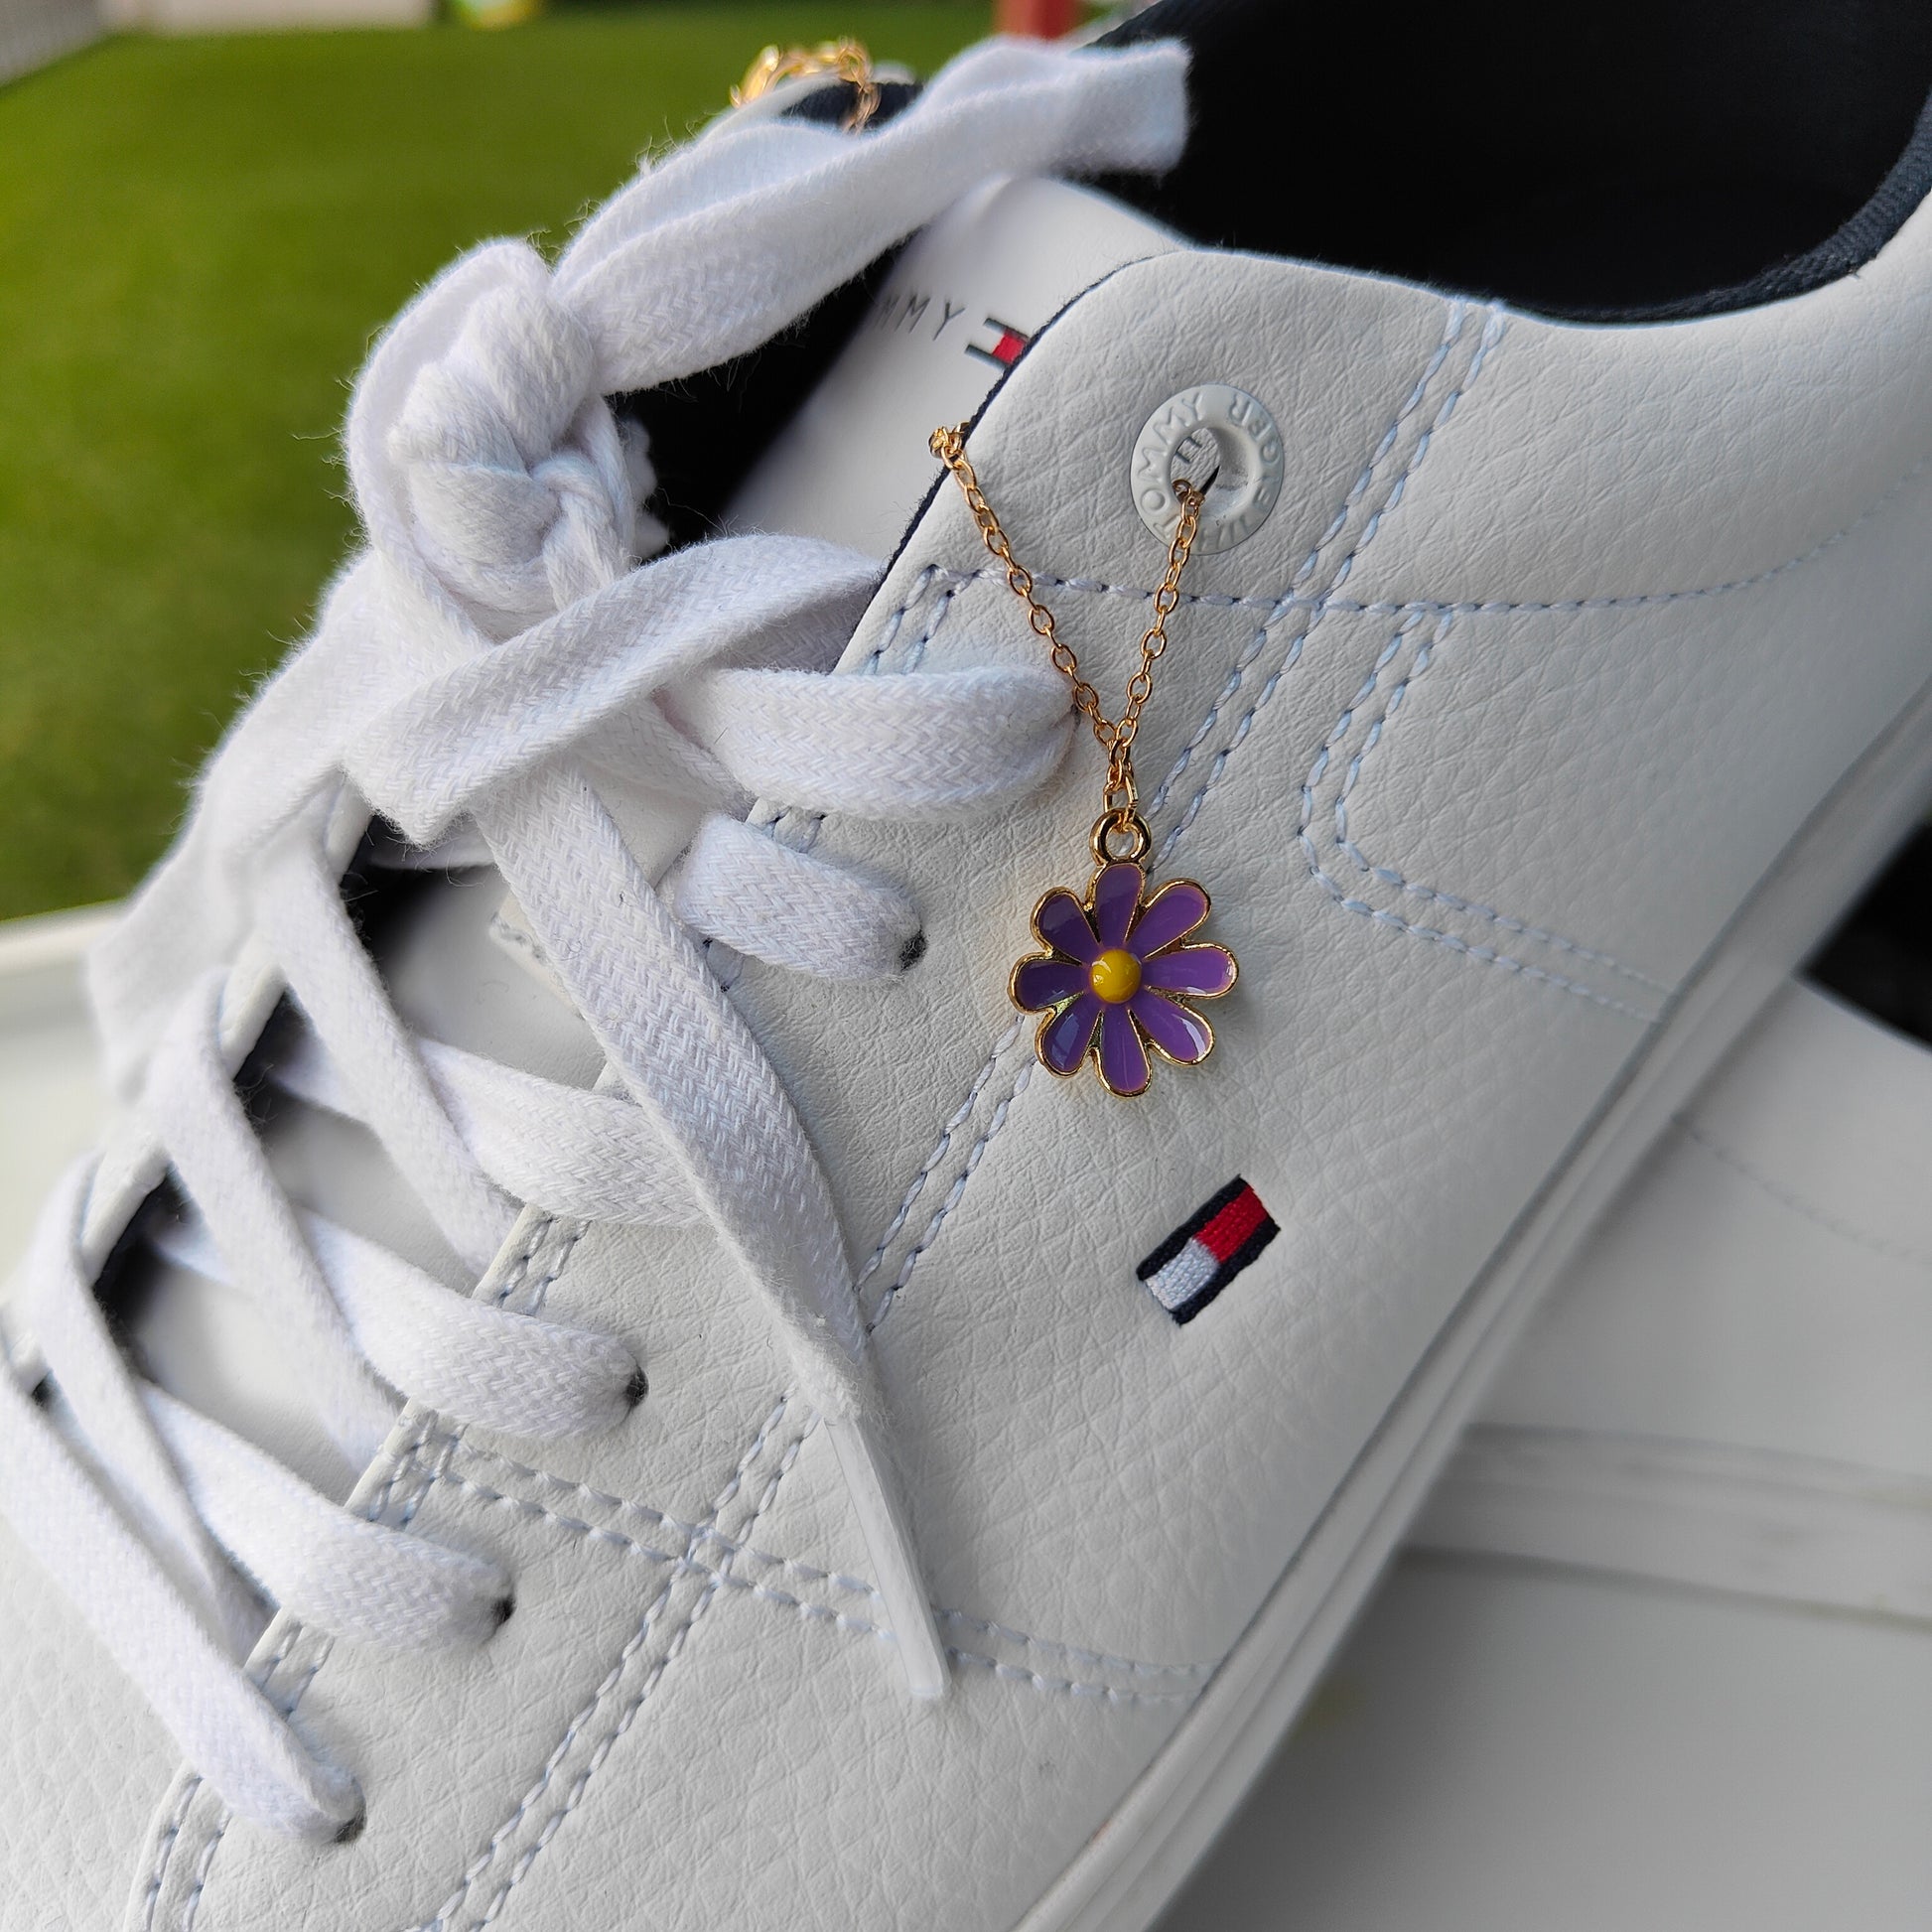 Daisy Sunflower Dangle Shoe Lace Sneaker Accessories Summer Floral Skate Charm